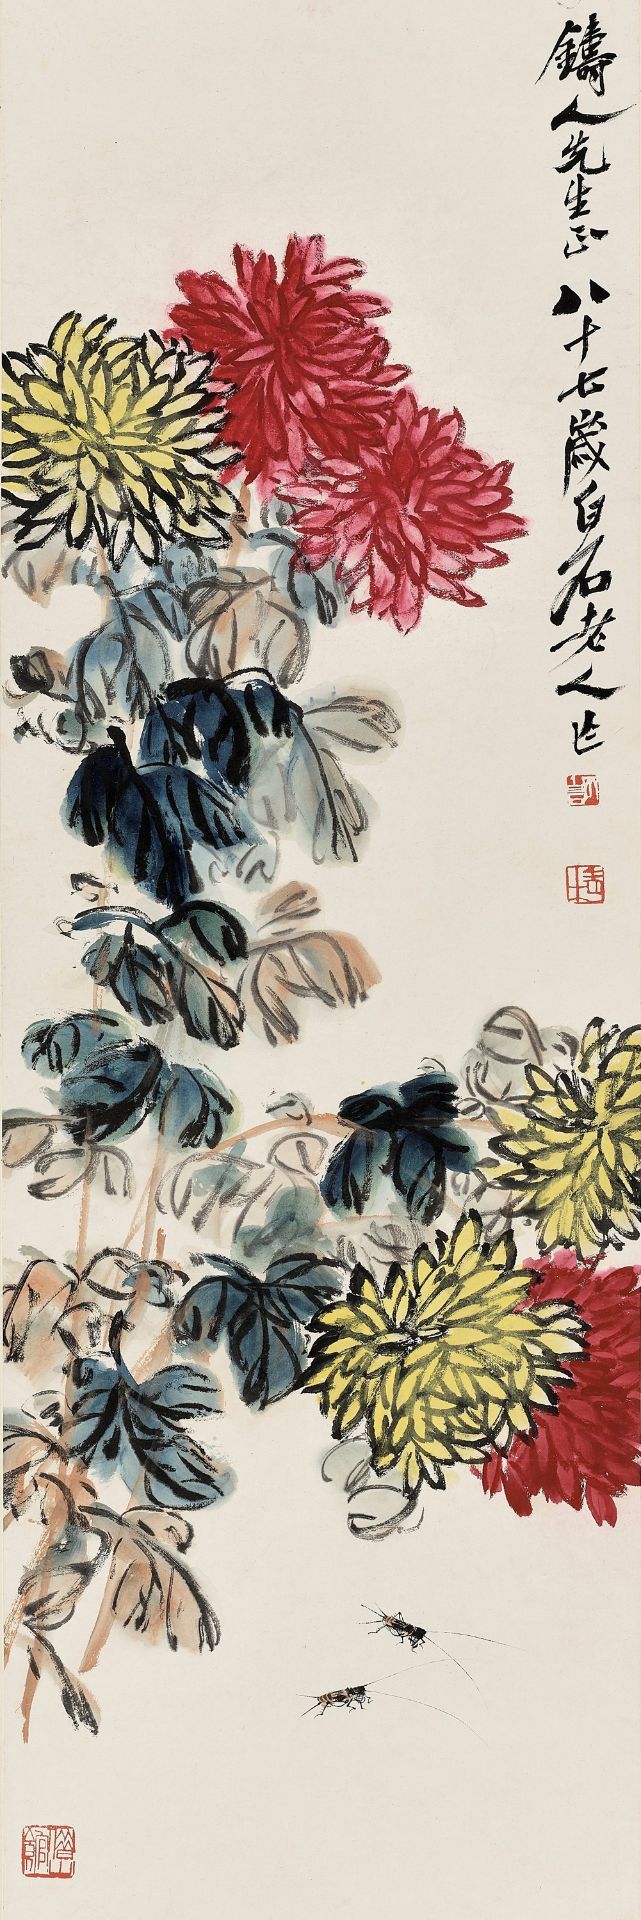 CHRYSANTHEMUM AND CRICKETS' BY QI BAISHI (1864-1957), DATED 1951